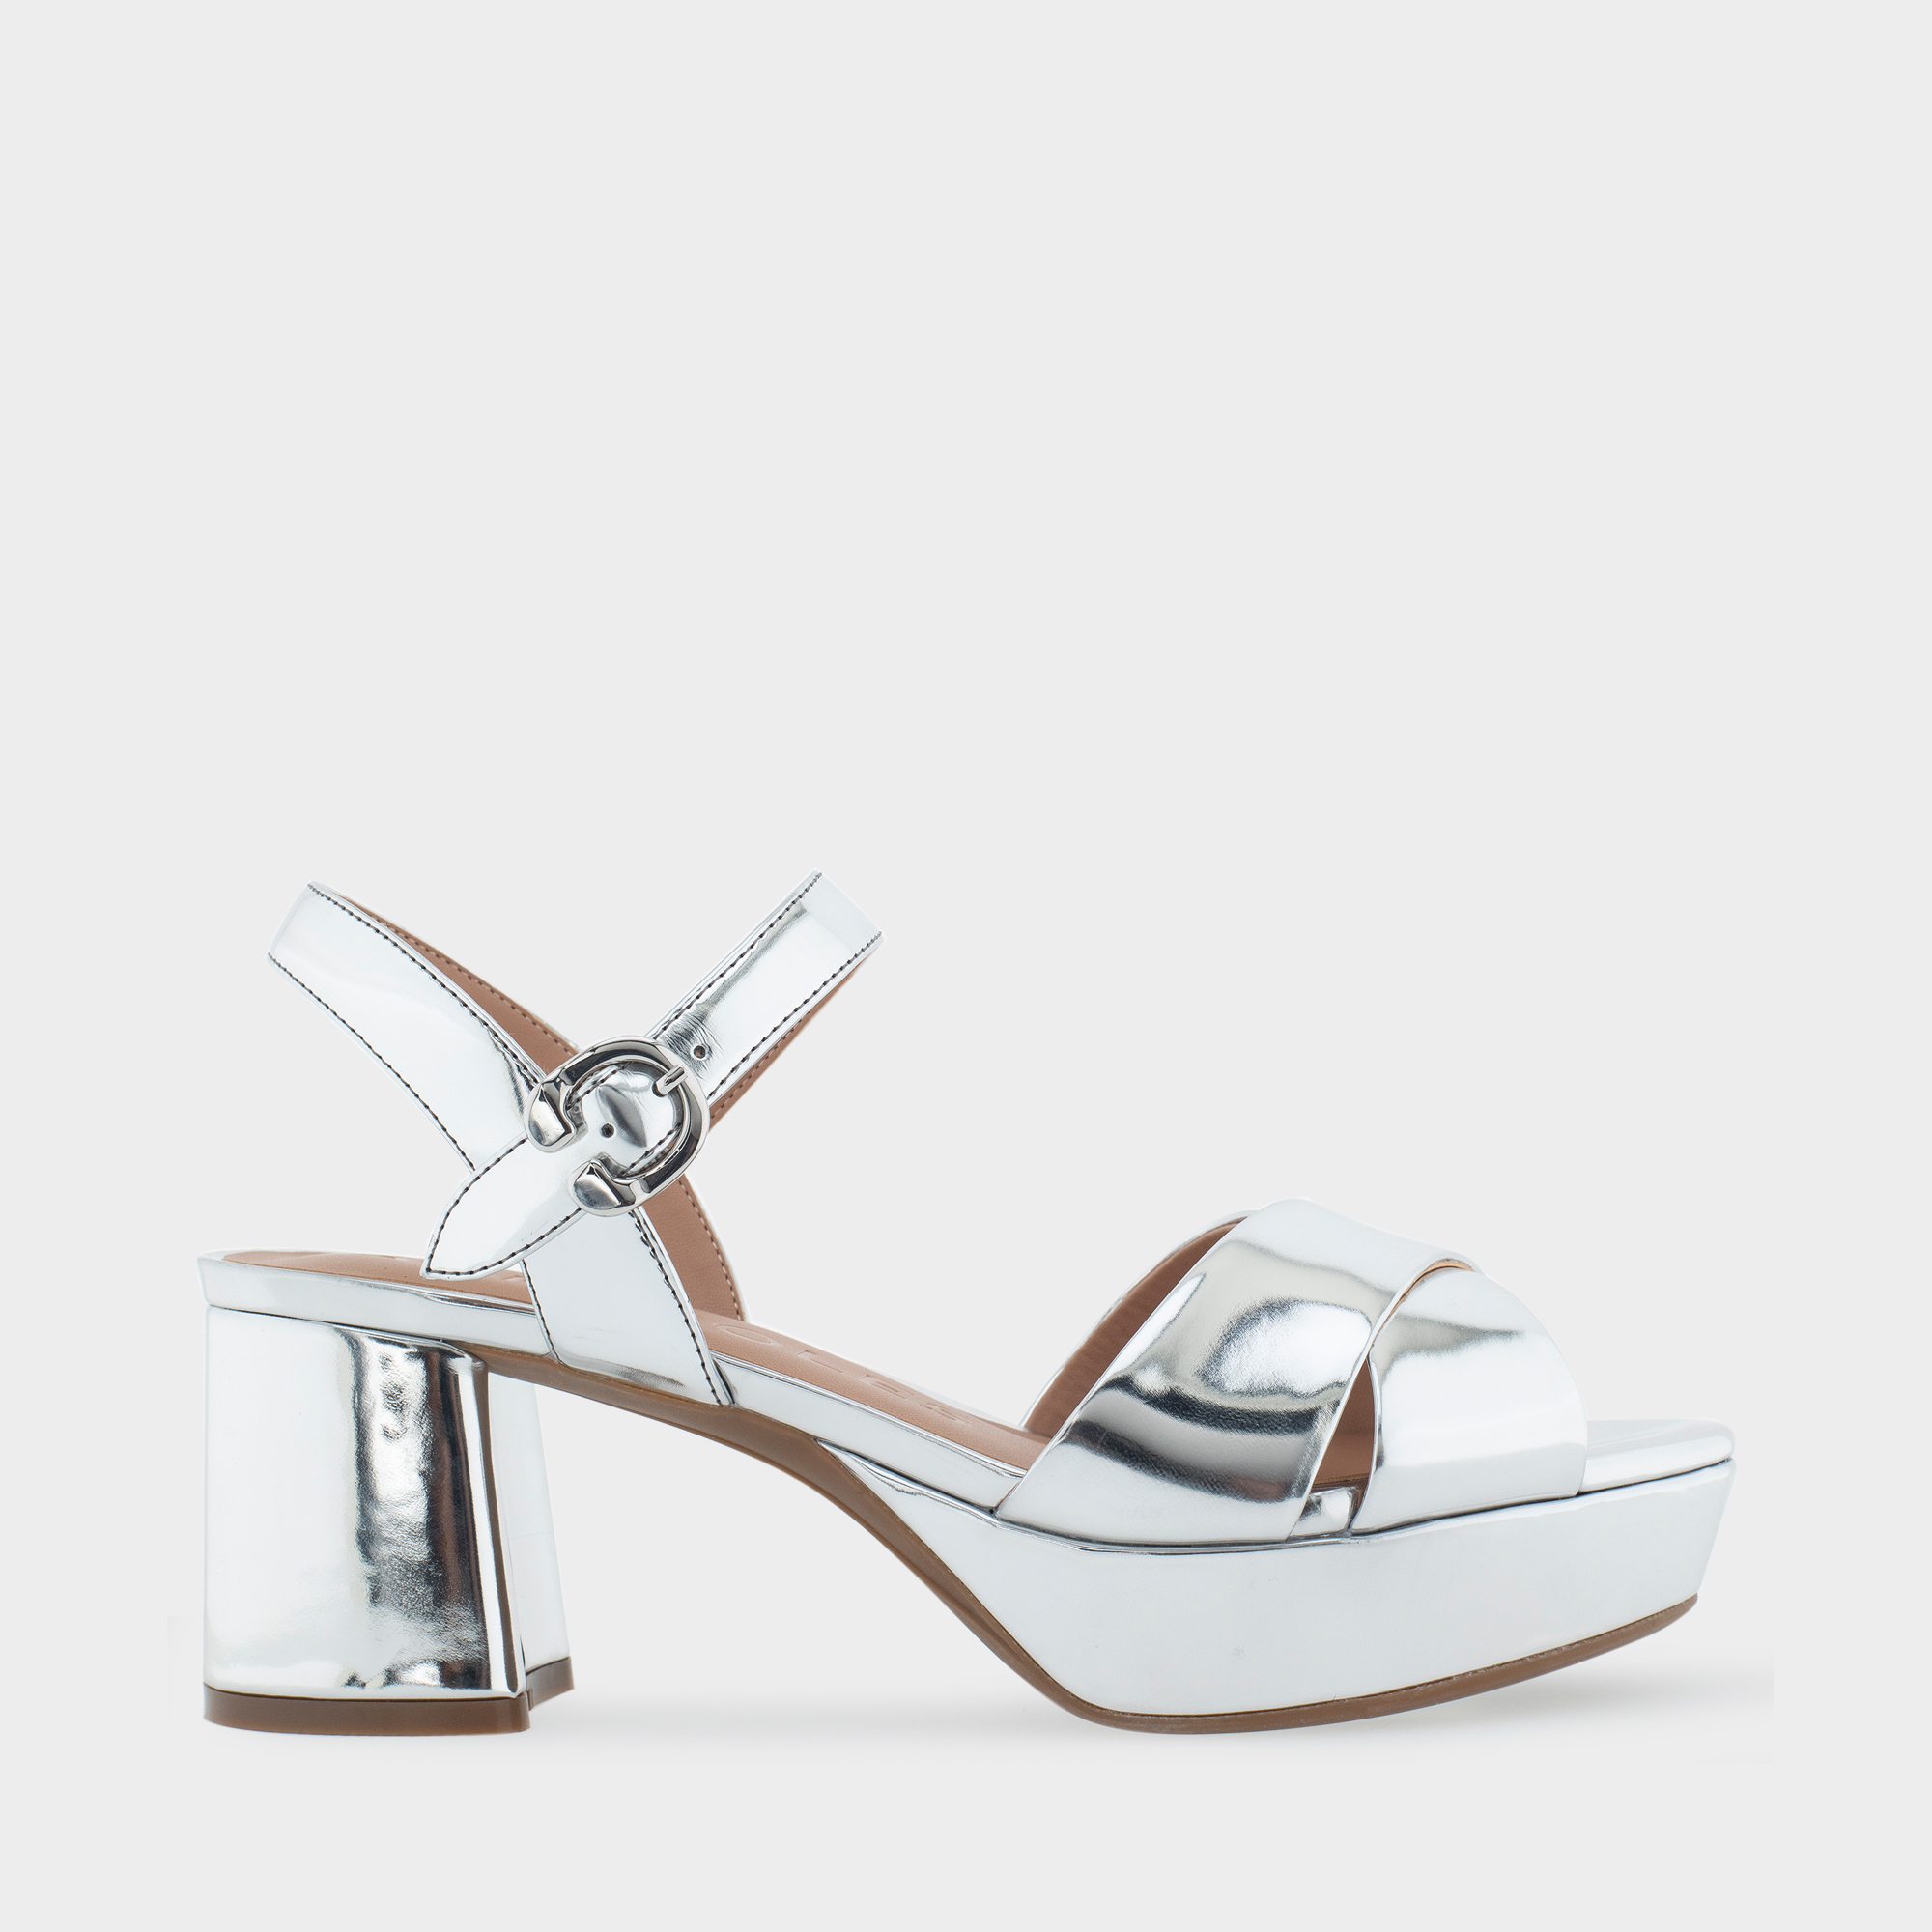 Cosmos Sandal in Silver Faux Leather